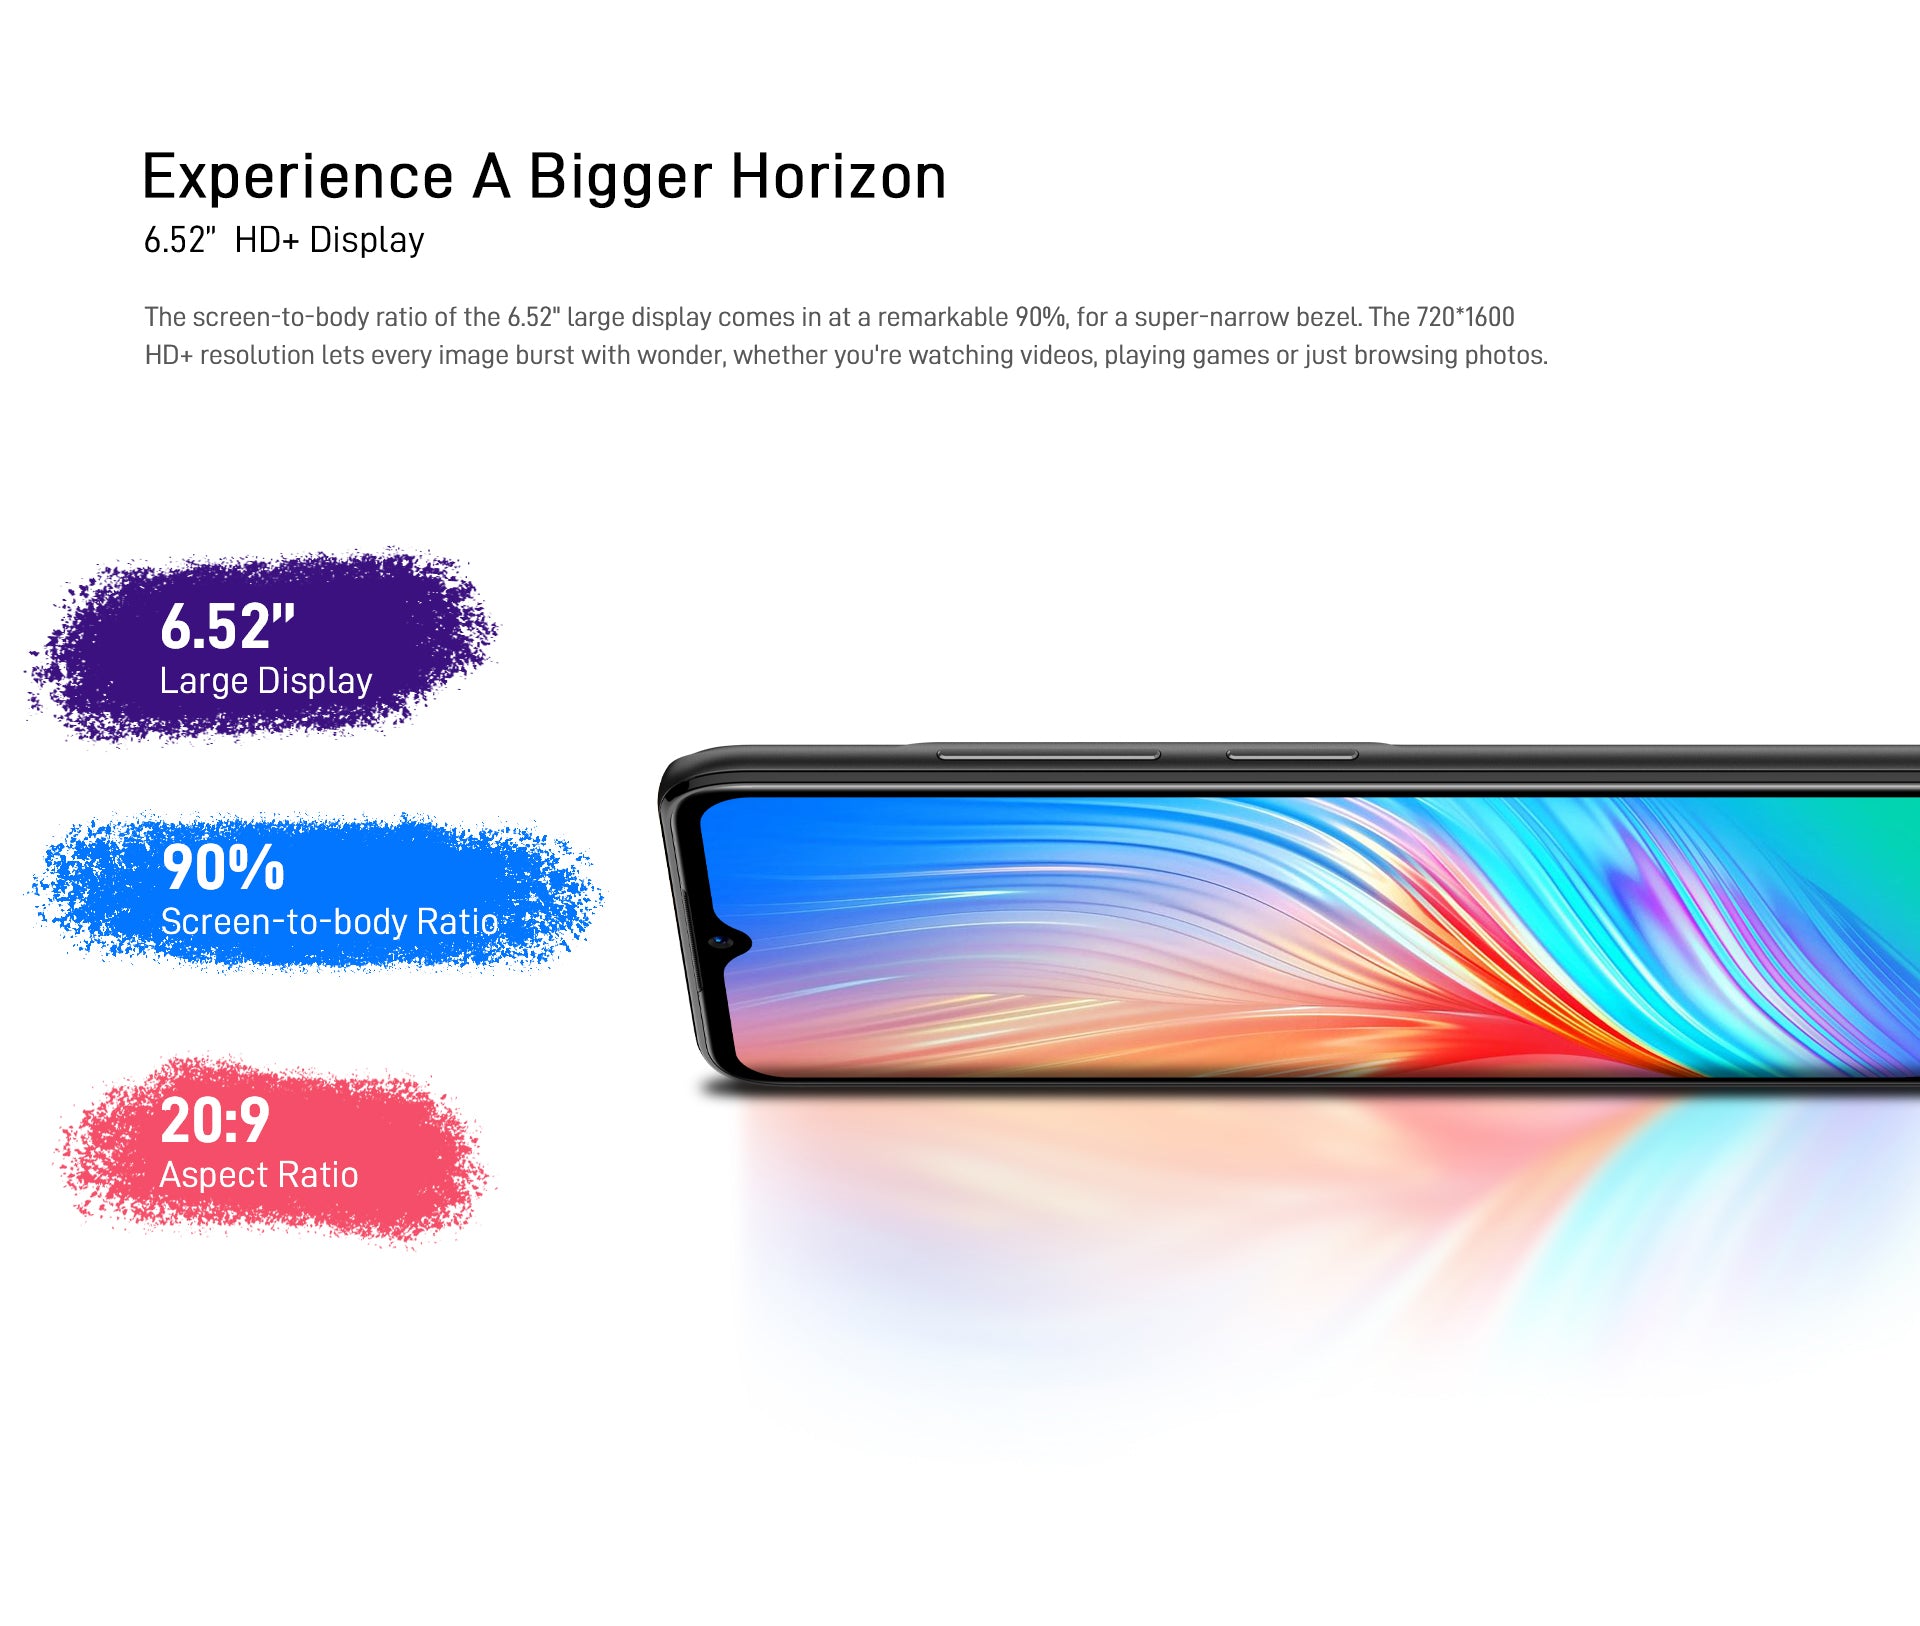 Experience A Bigger Horizon 6.52”  HD+ Display The screen-to-body ratio of the 6.52" large display comes in at a remarkable 90%, for a super-narrow bezel. The 720*1600 HD+ resolution lets every image burst with wonder, whether you're watching videos, playing games or just browsing photos.  -6.52” Large display  -90%  Screen-to-body ratio  -20:9  Aspect Ratio